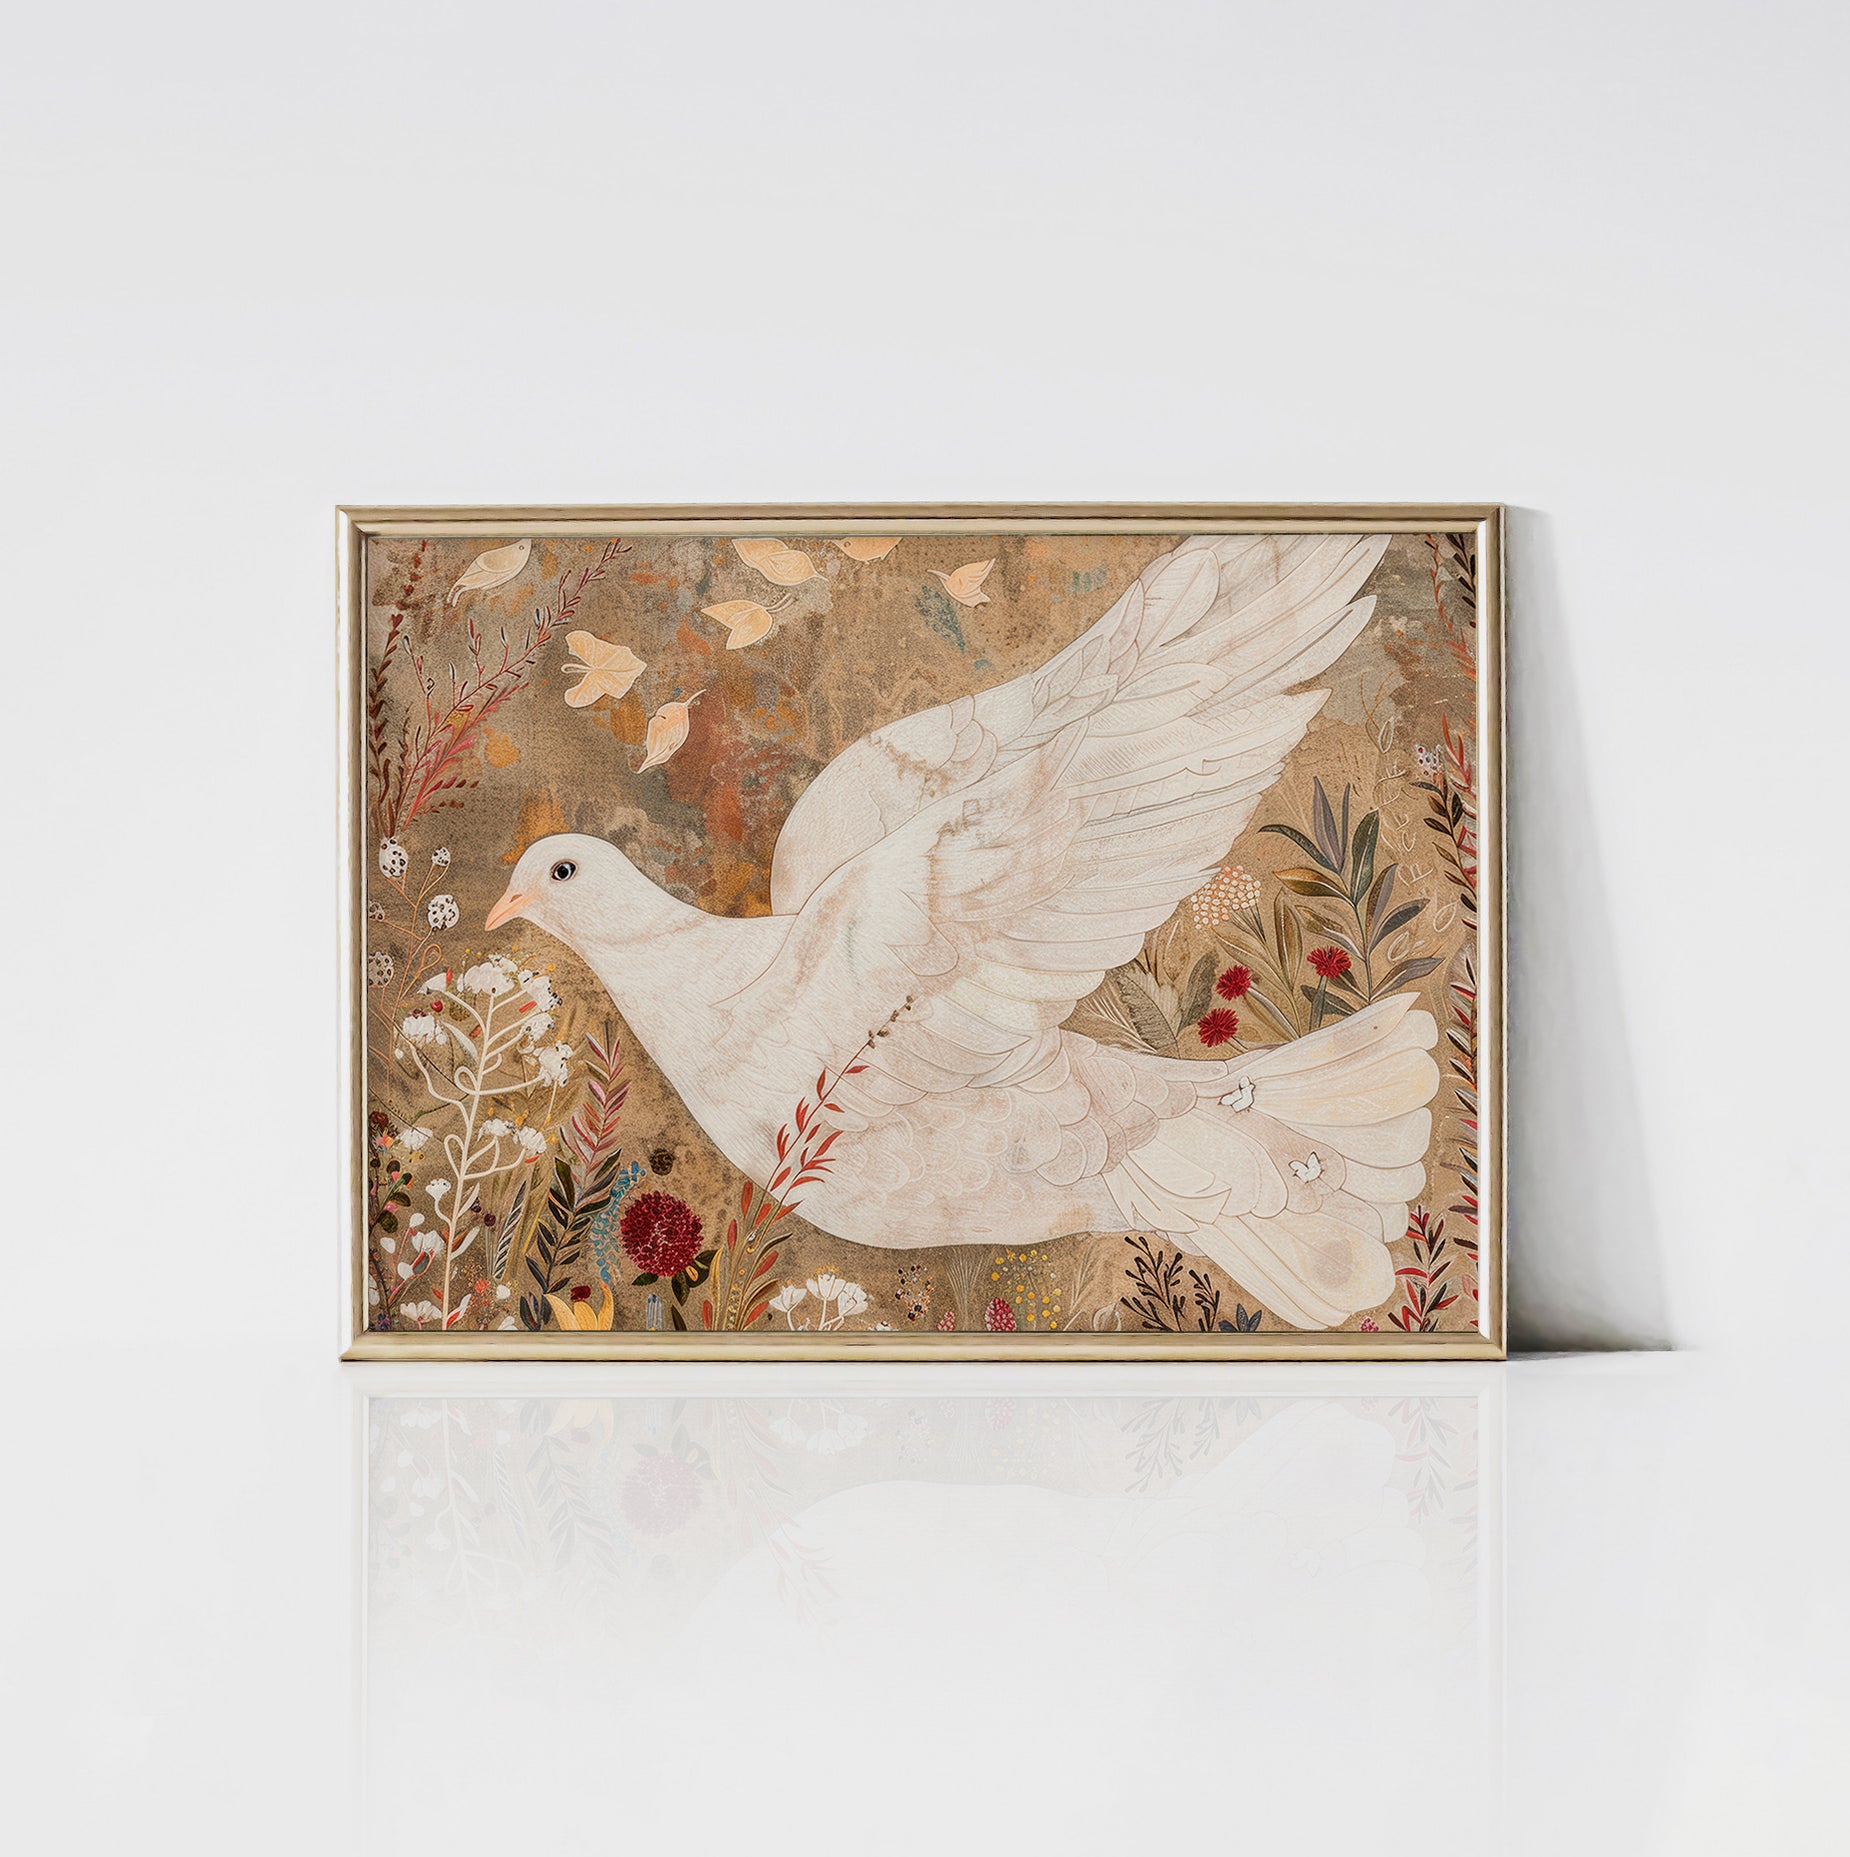 Close-up view of the Serene Dove Art Print featuring a detailed white dove in mid-flight surrounded by delicate botanical elements in shades of red, yellow, and brown